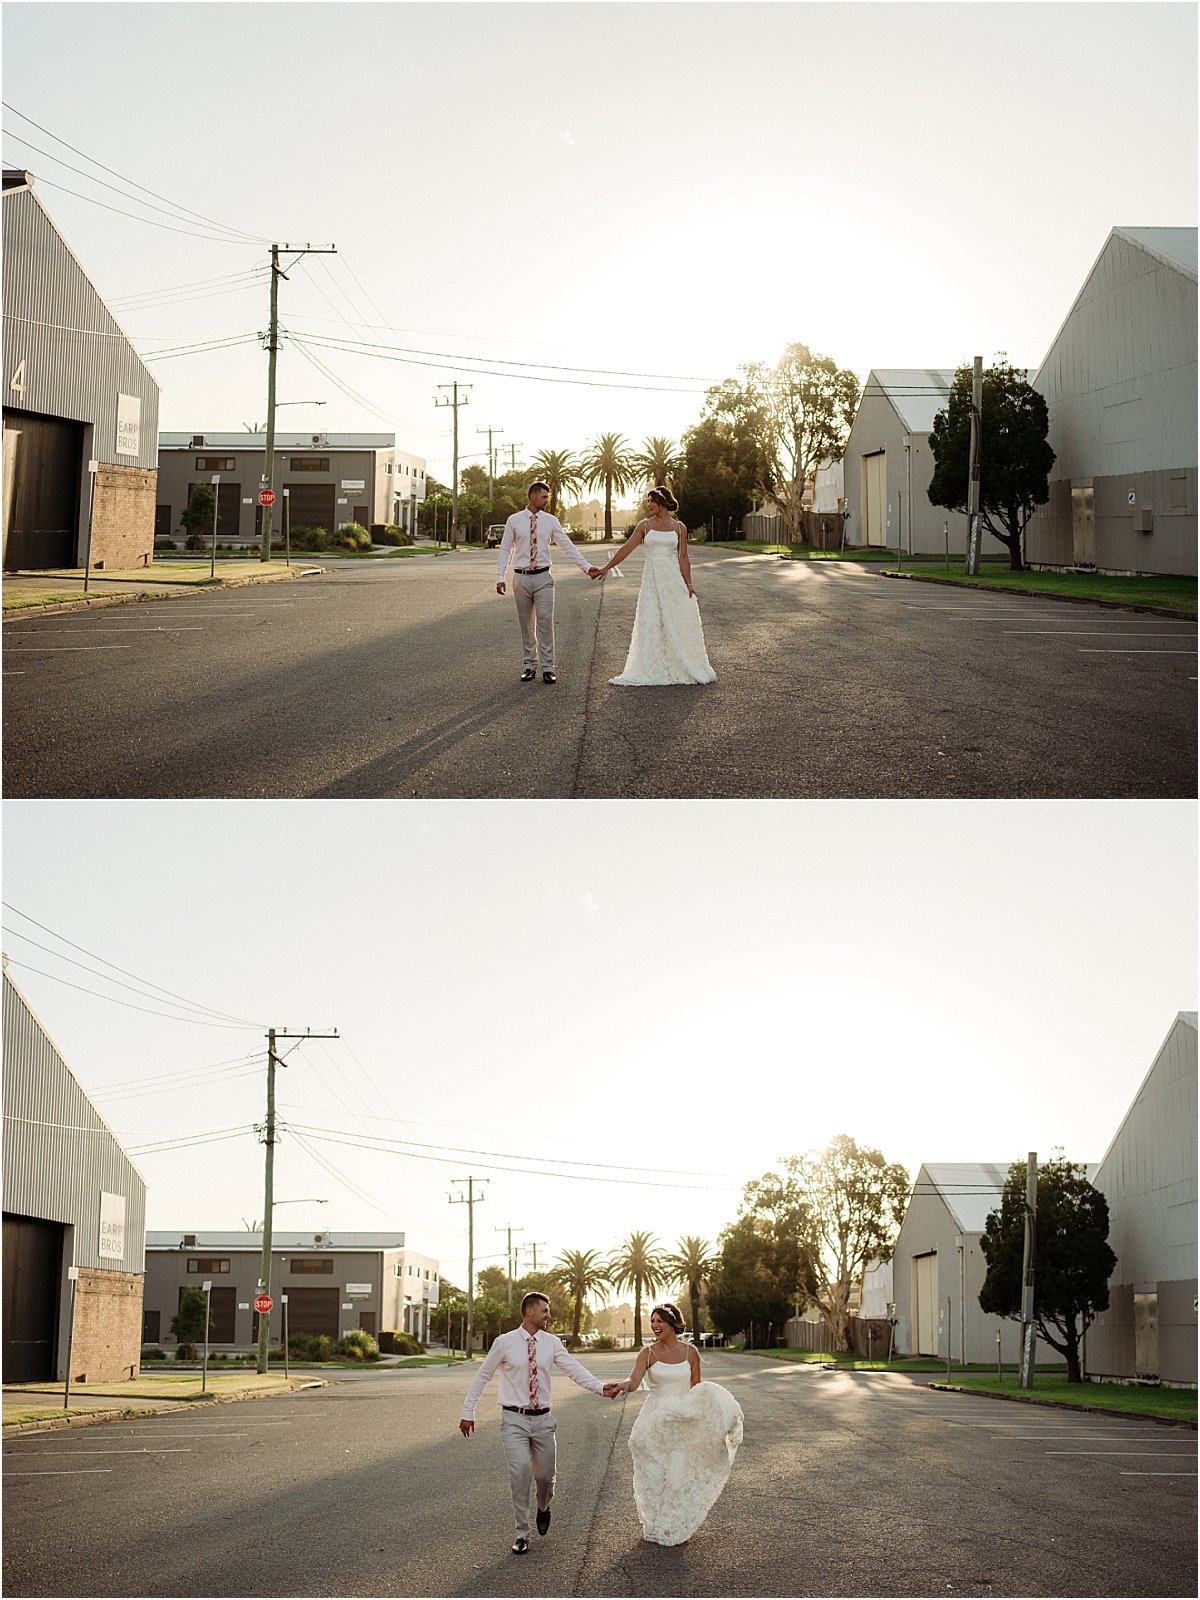 Bride and groom walking and dancing in the street together at sunset in Carrington NSW